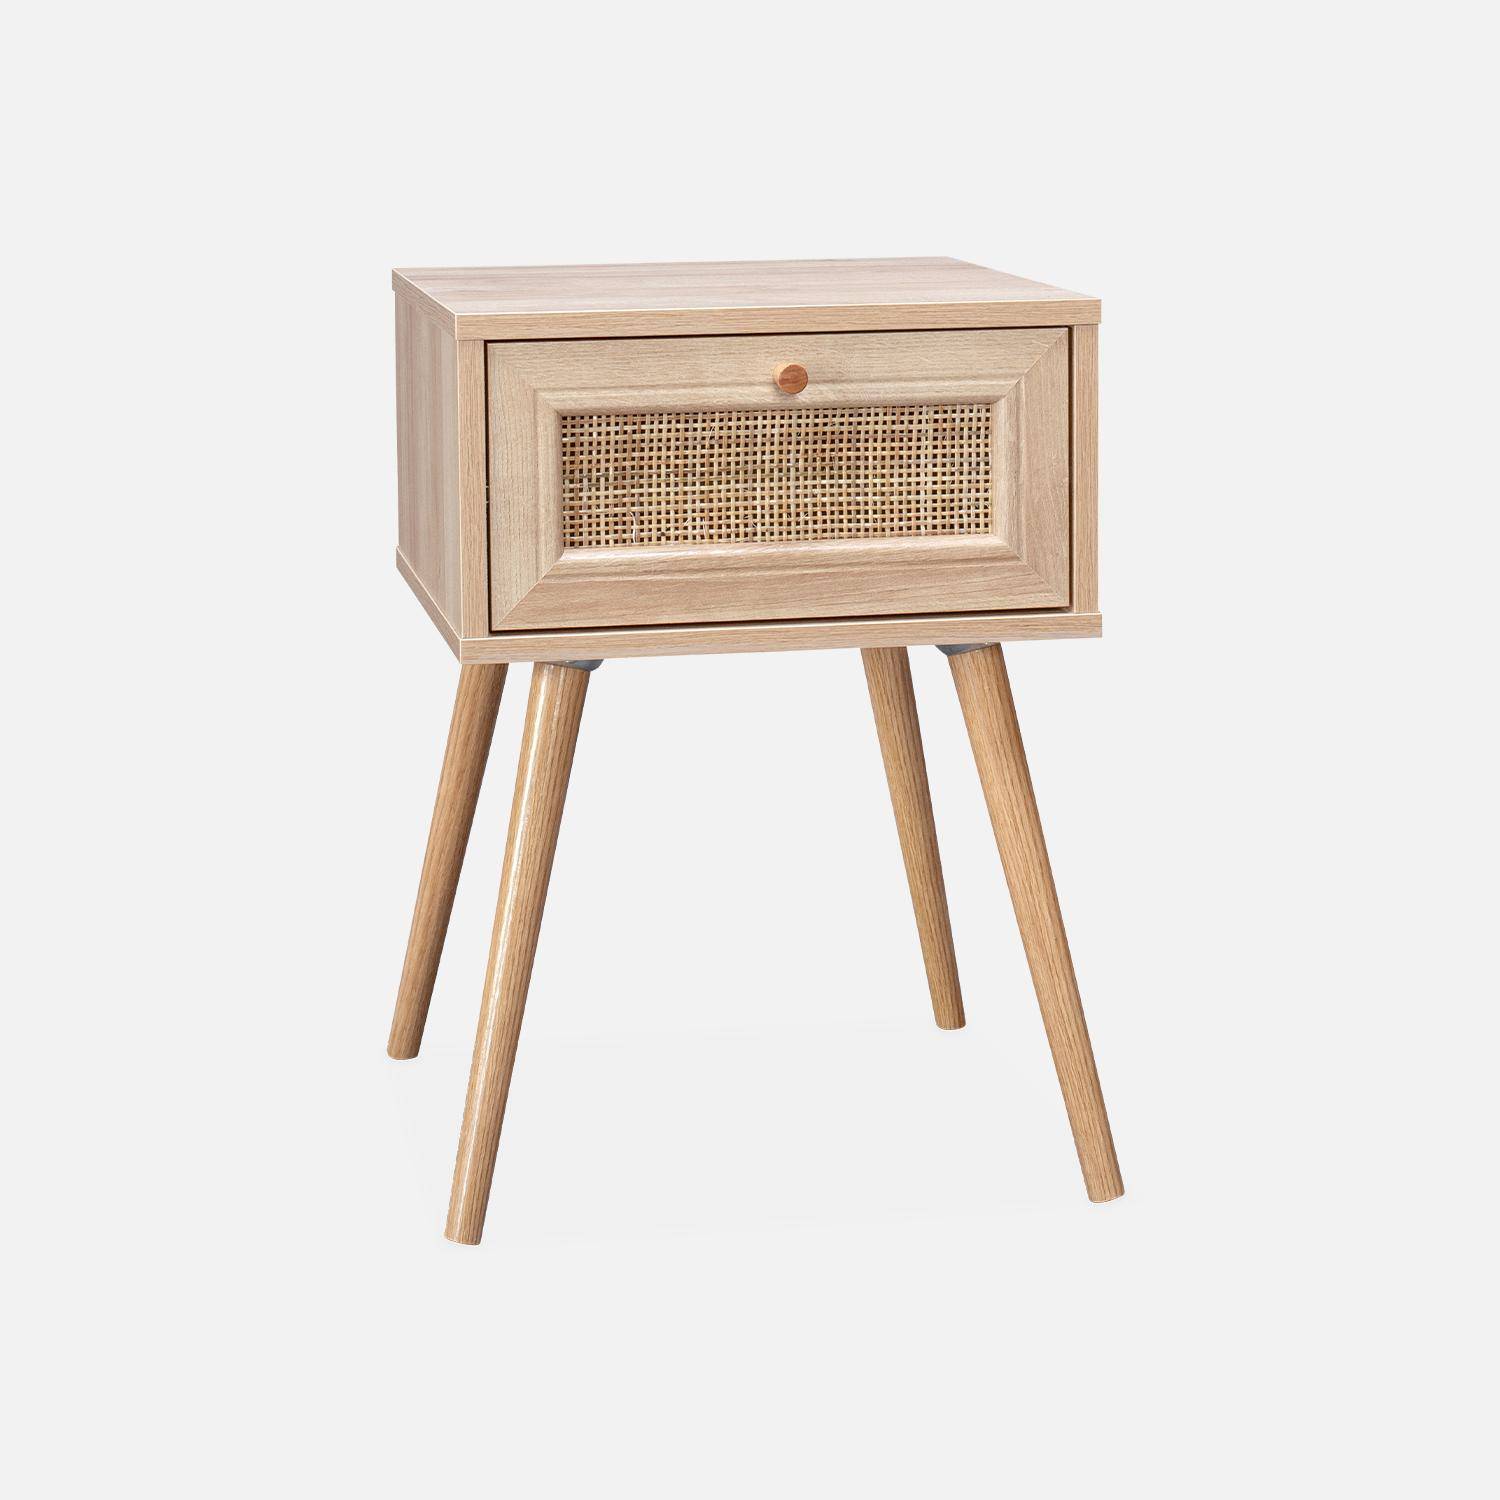 Woven rattan bedside table with drawer, 39x39x55.4cm - Boheme - Natural Wood colour,sweeek,Photo3